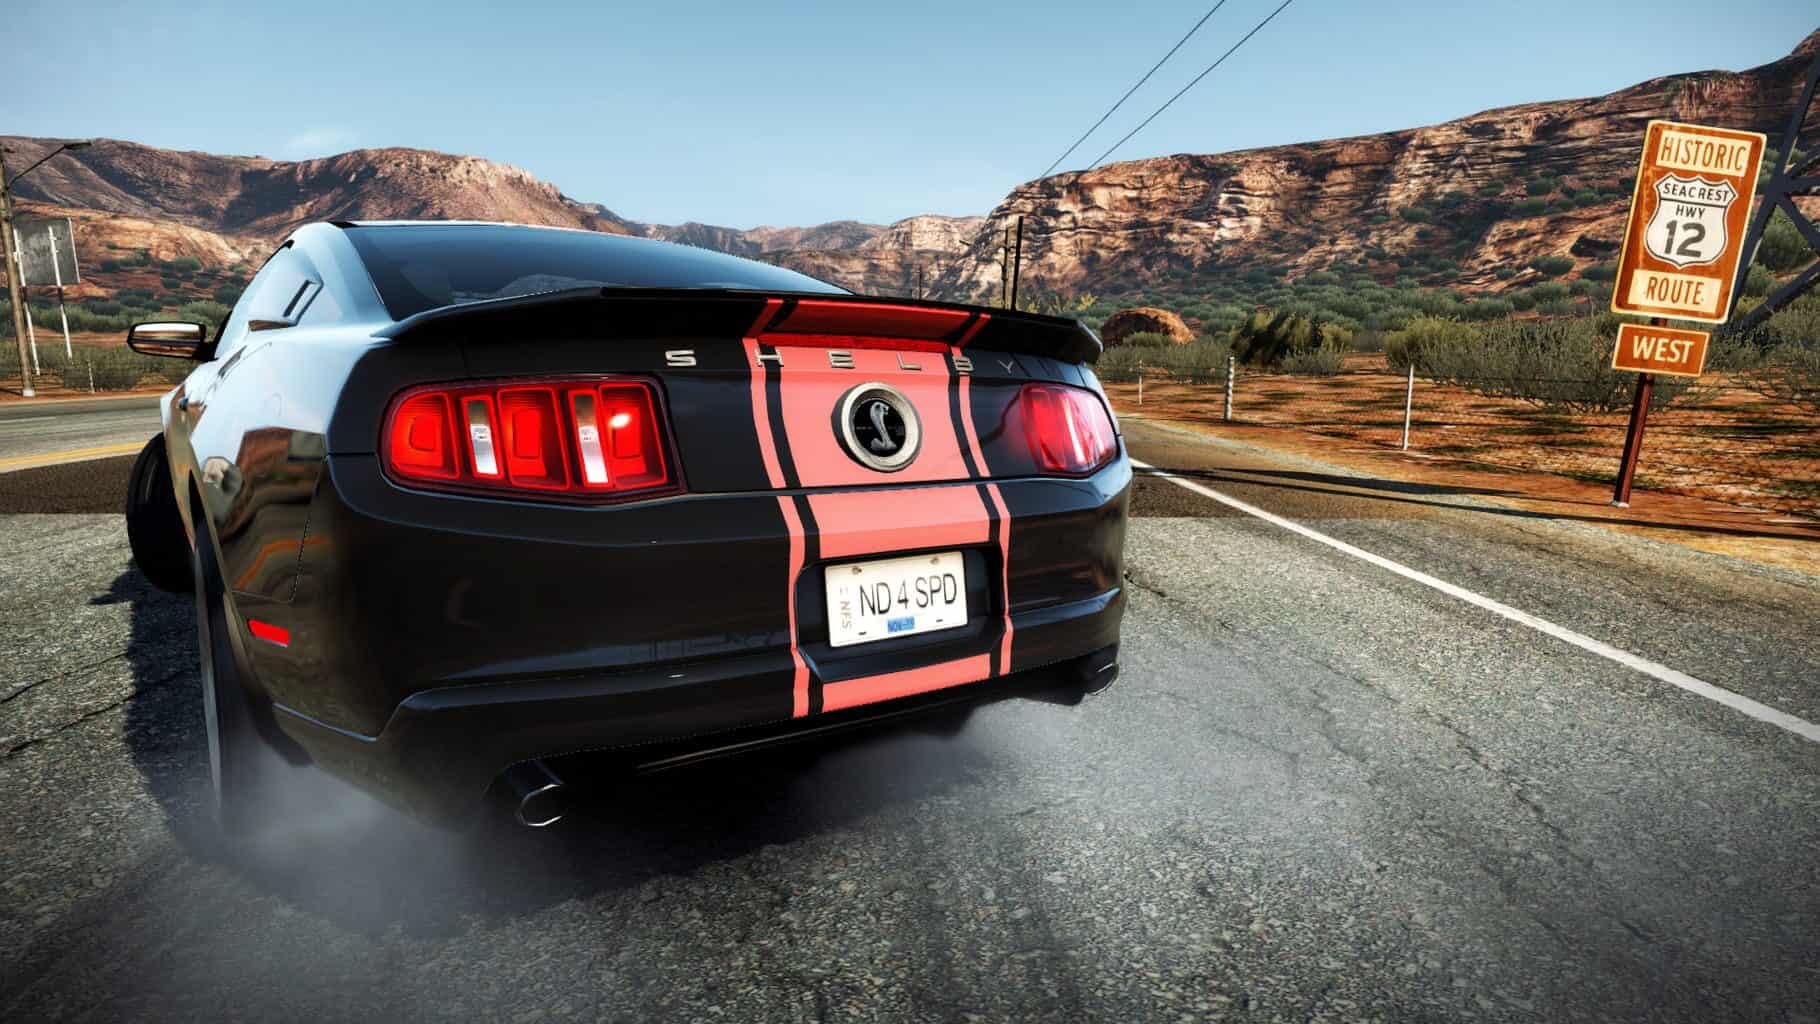 The Complete List of Need For Speed Games in Chronological & Release Order